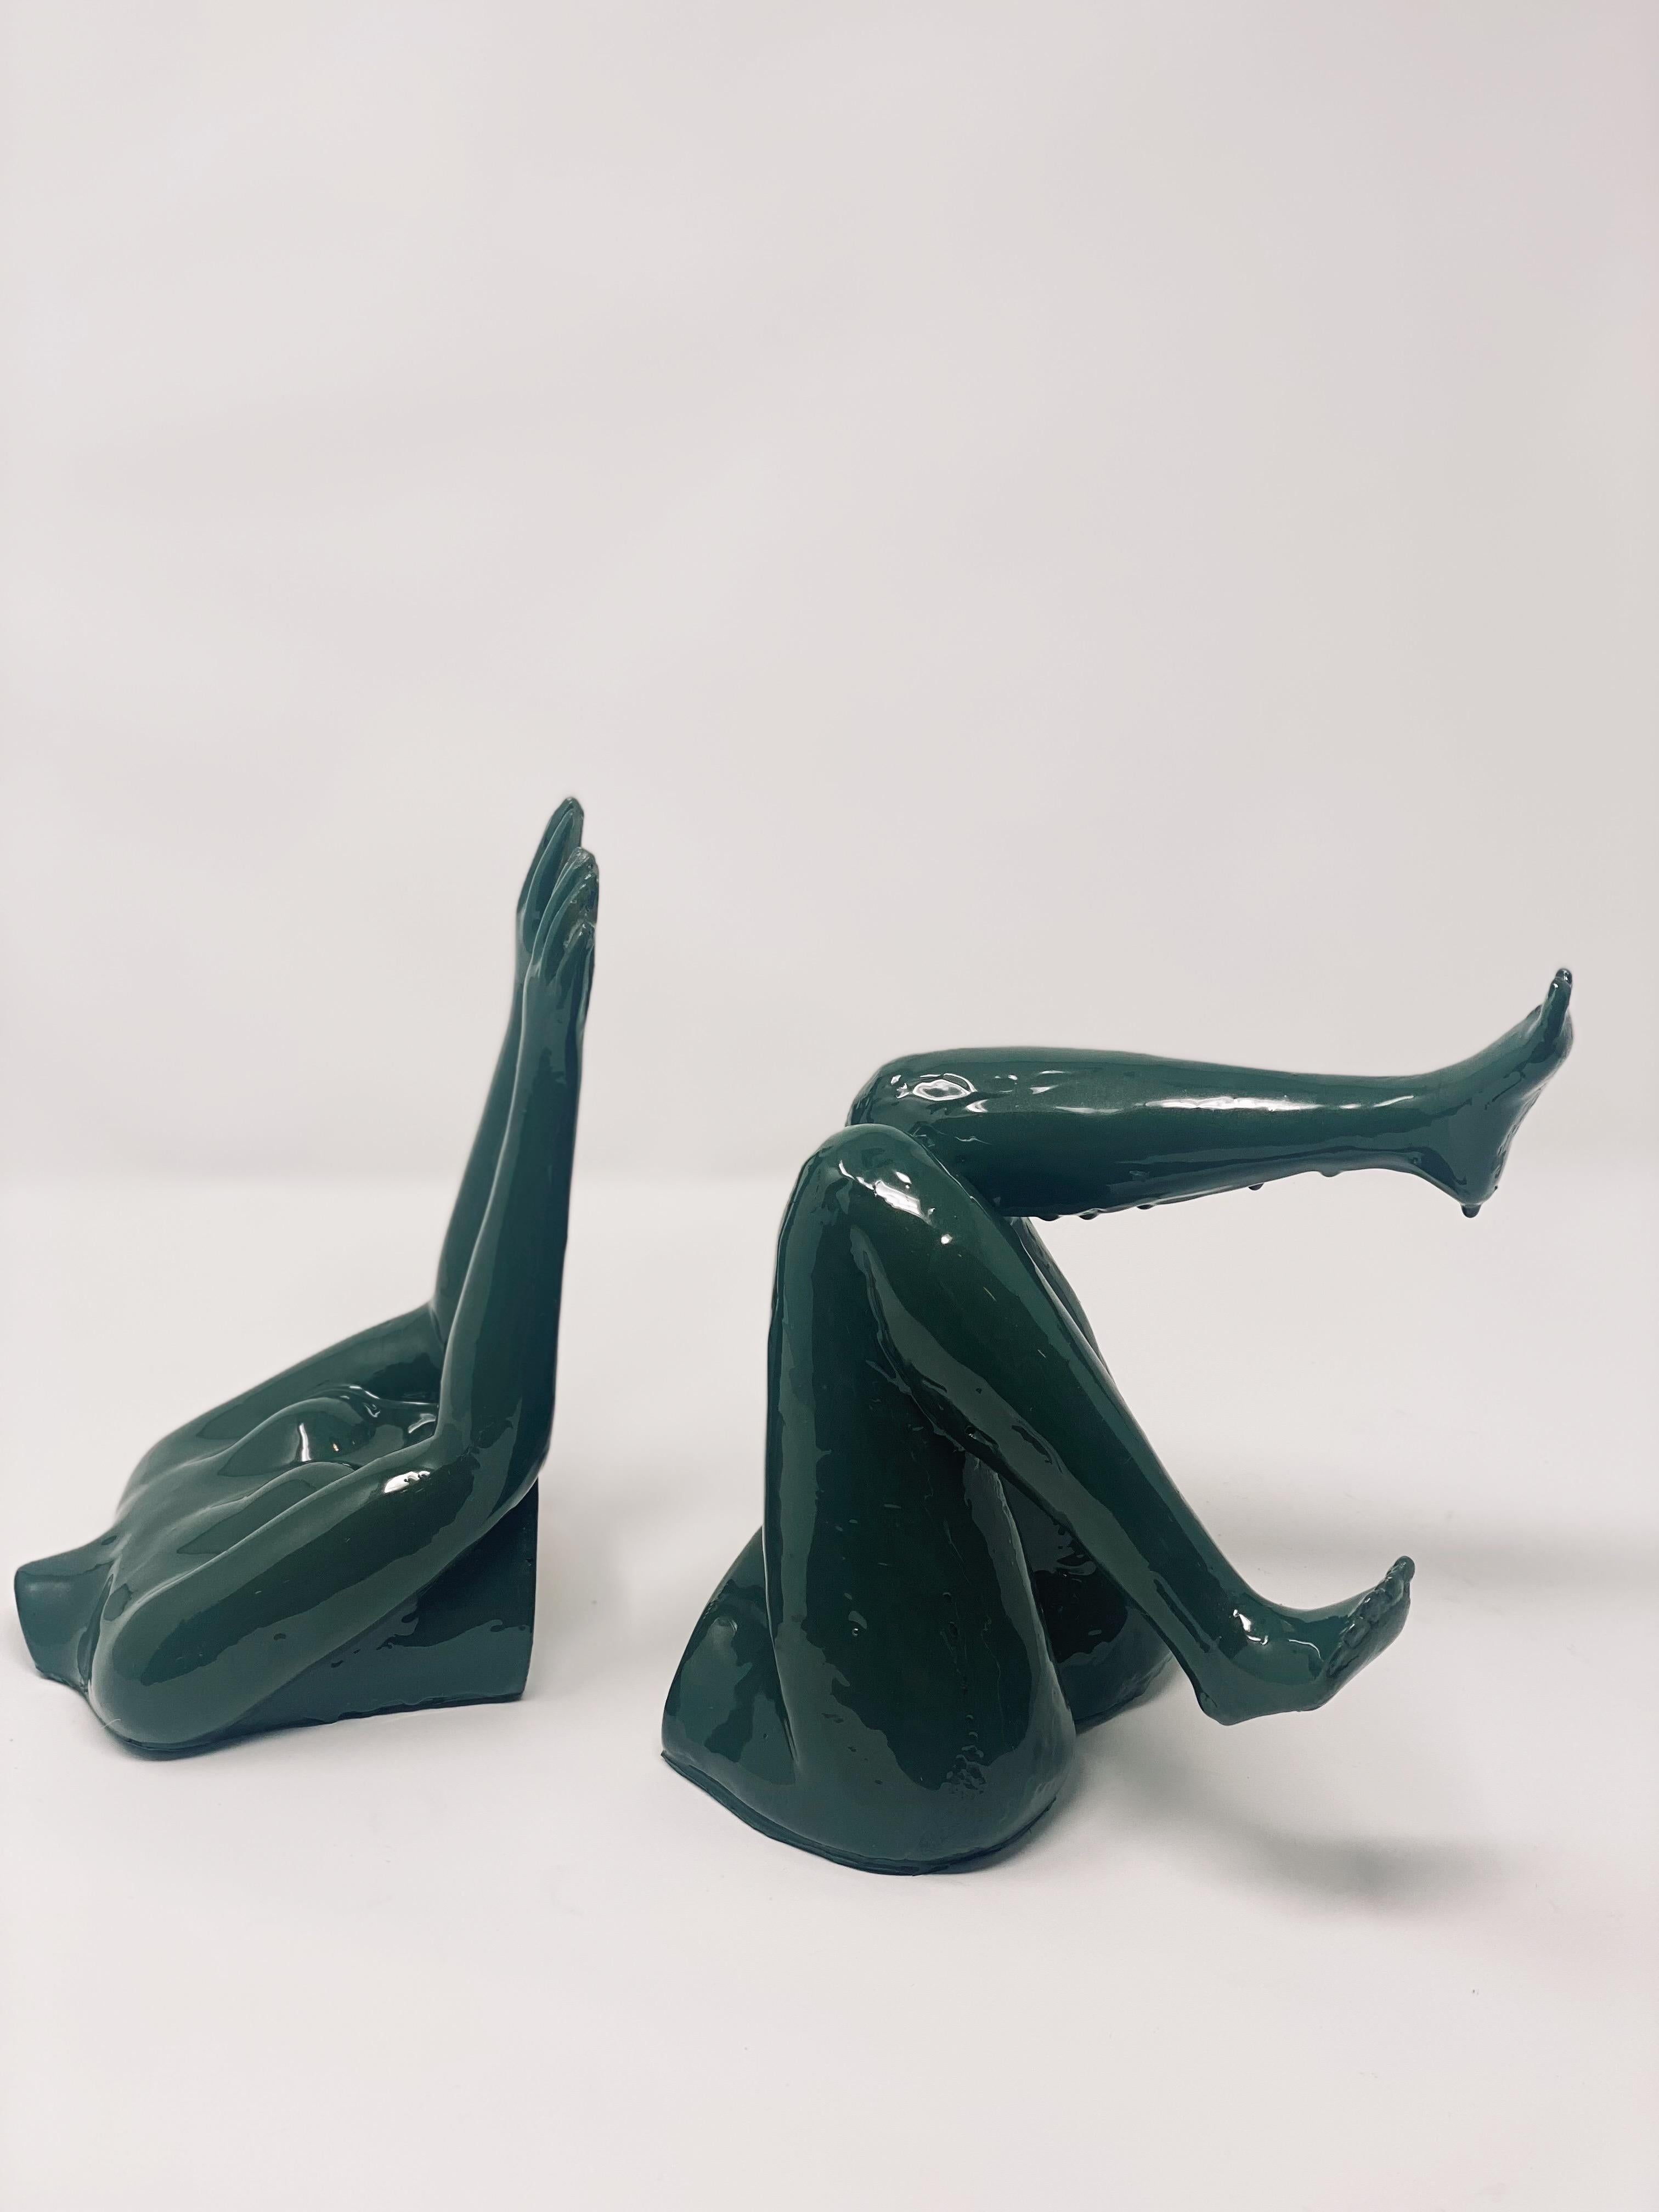 Cast Il Corpo Bookends Resin on Resin For Sale